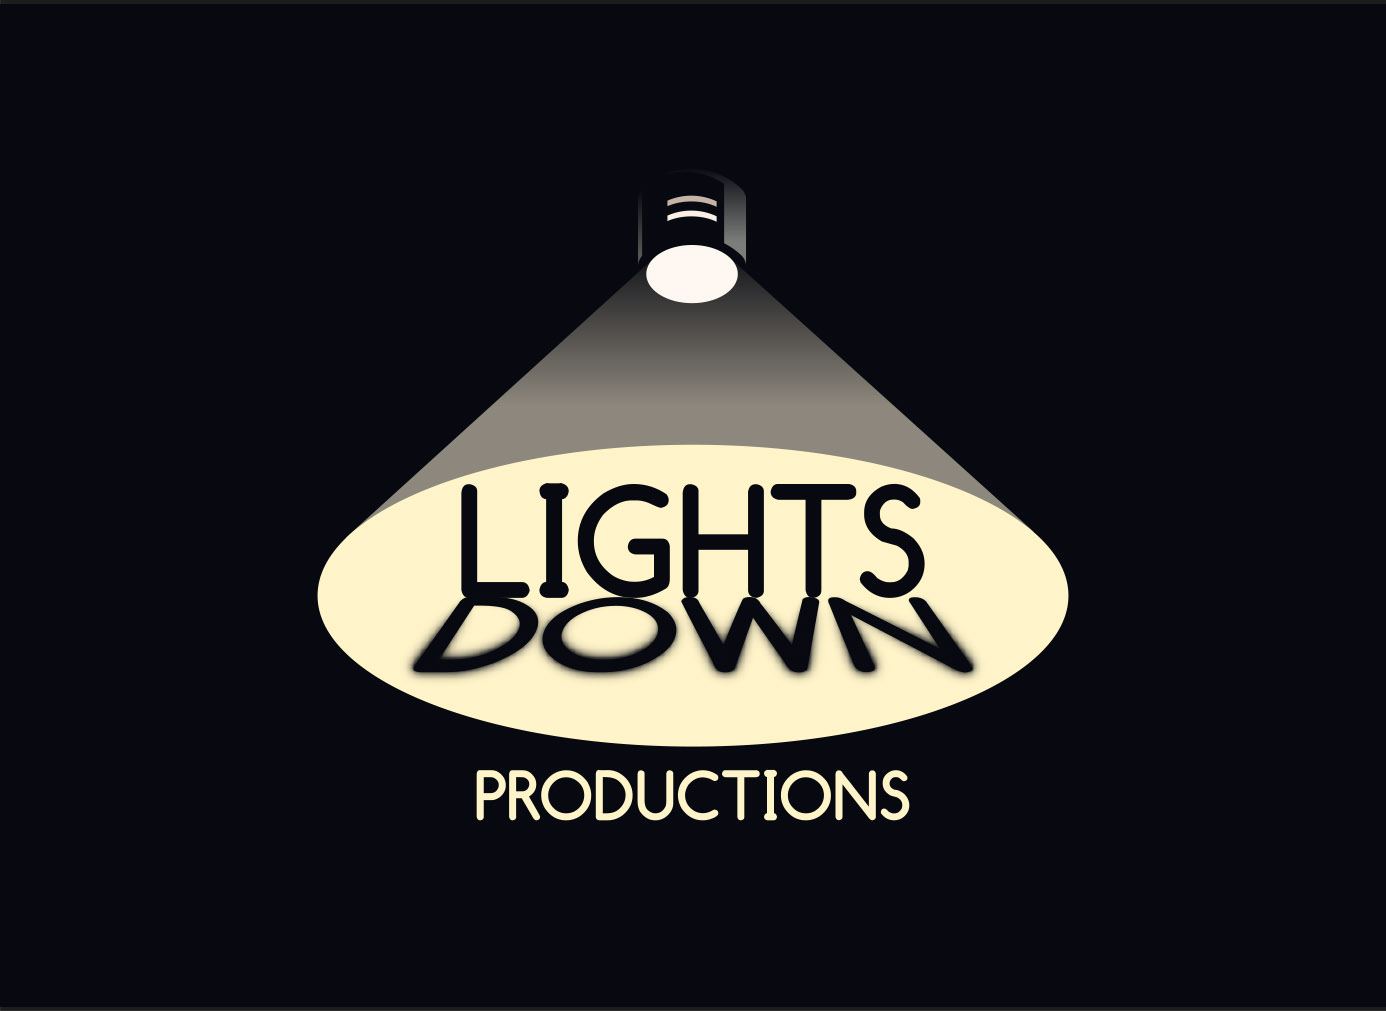 Lights Down Productions logo